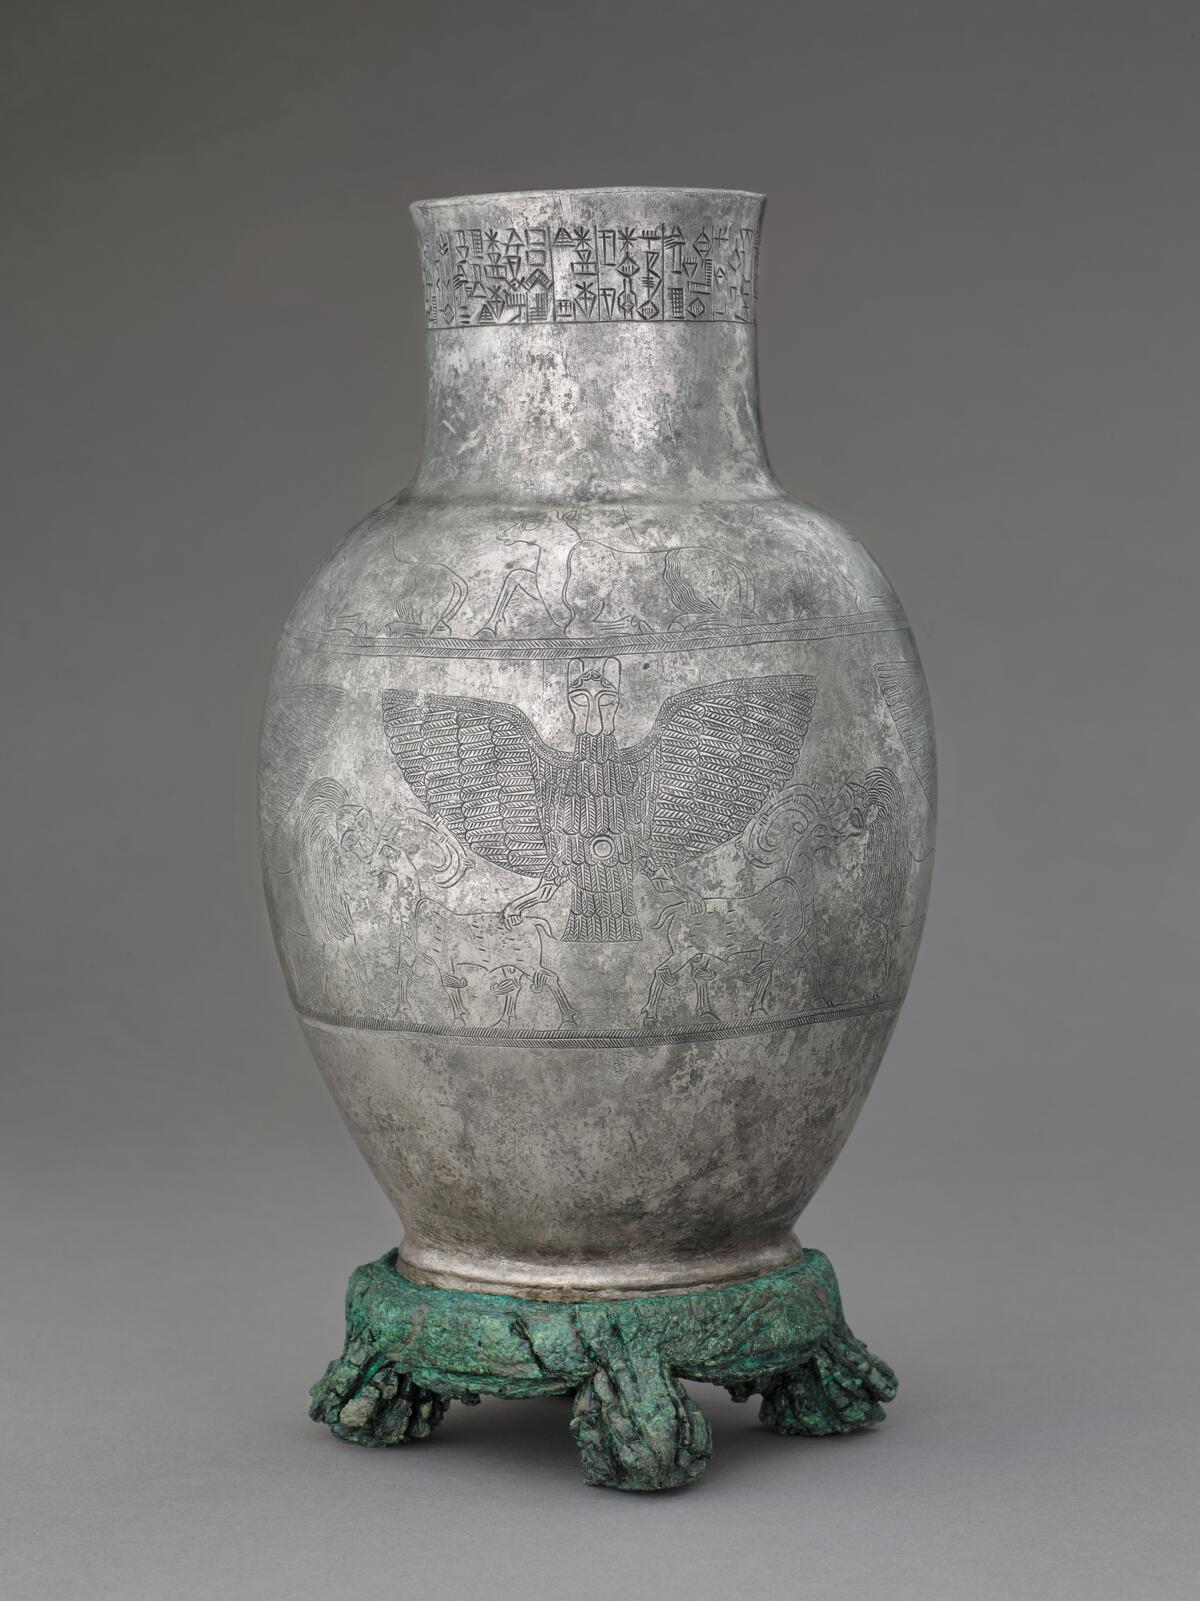 A devotional vessel made of silver and copper alloy, depicting a lion-headed eagle.